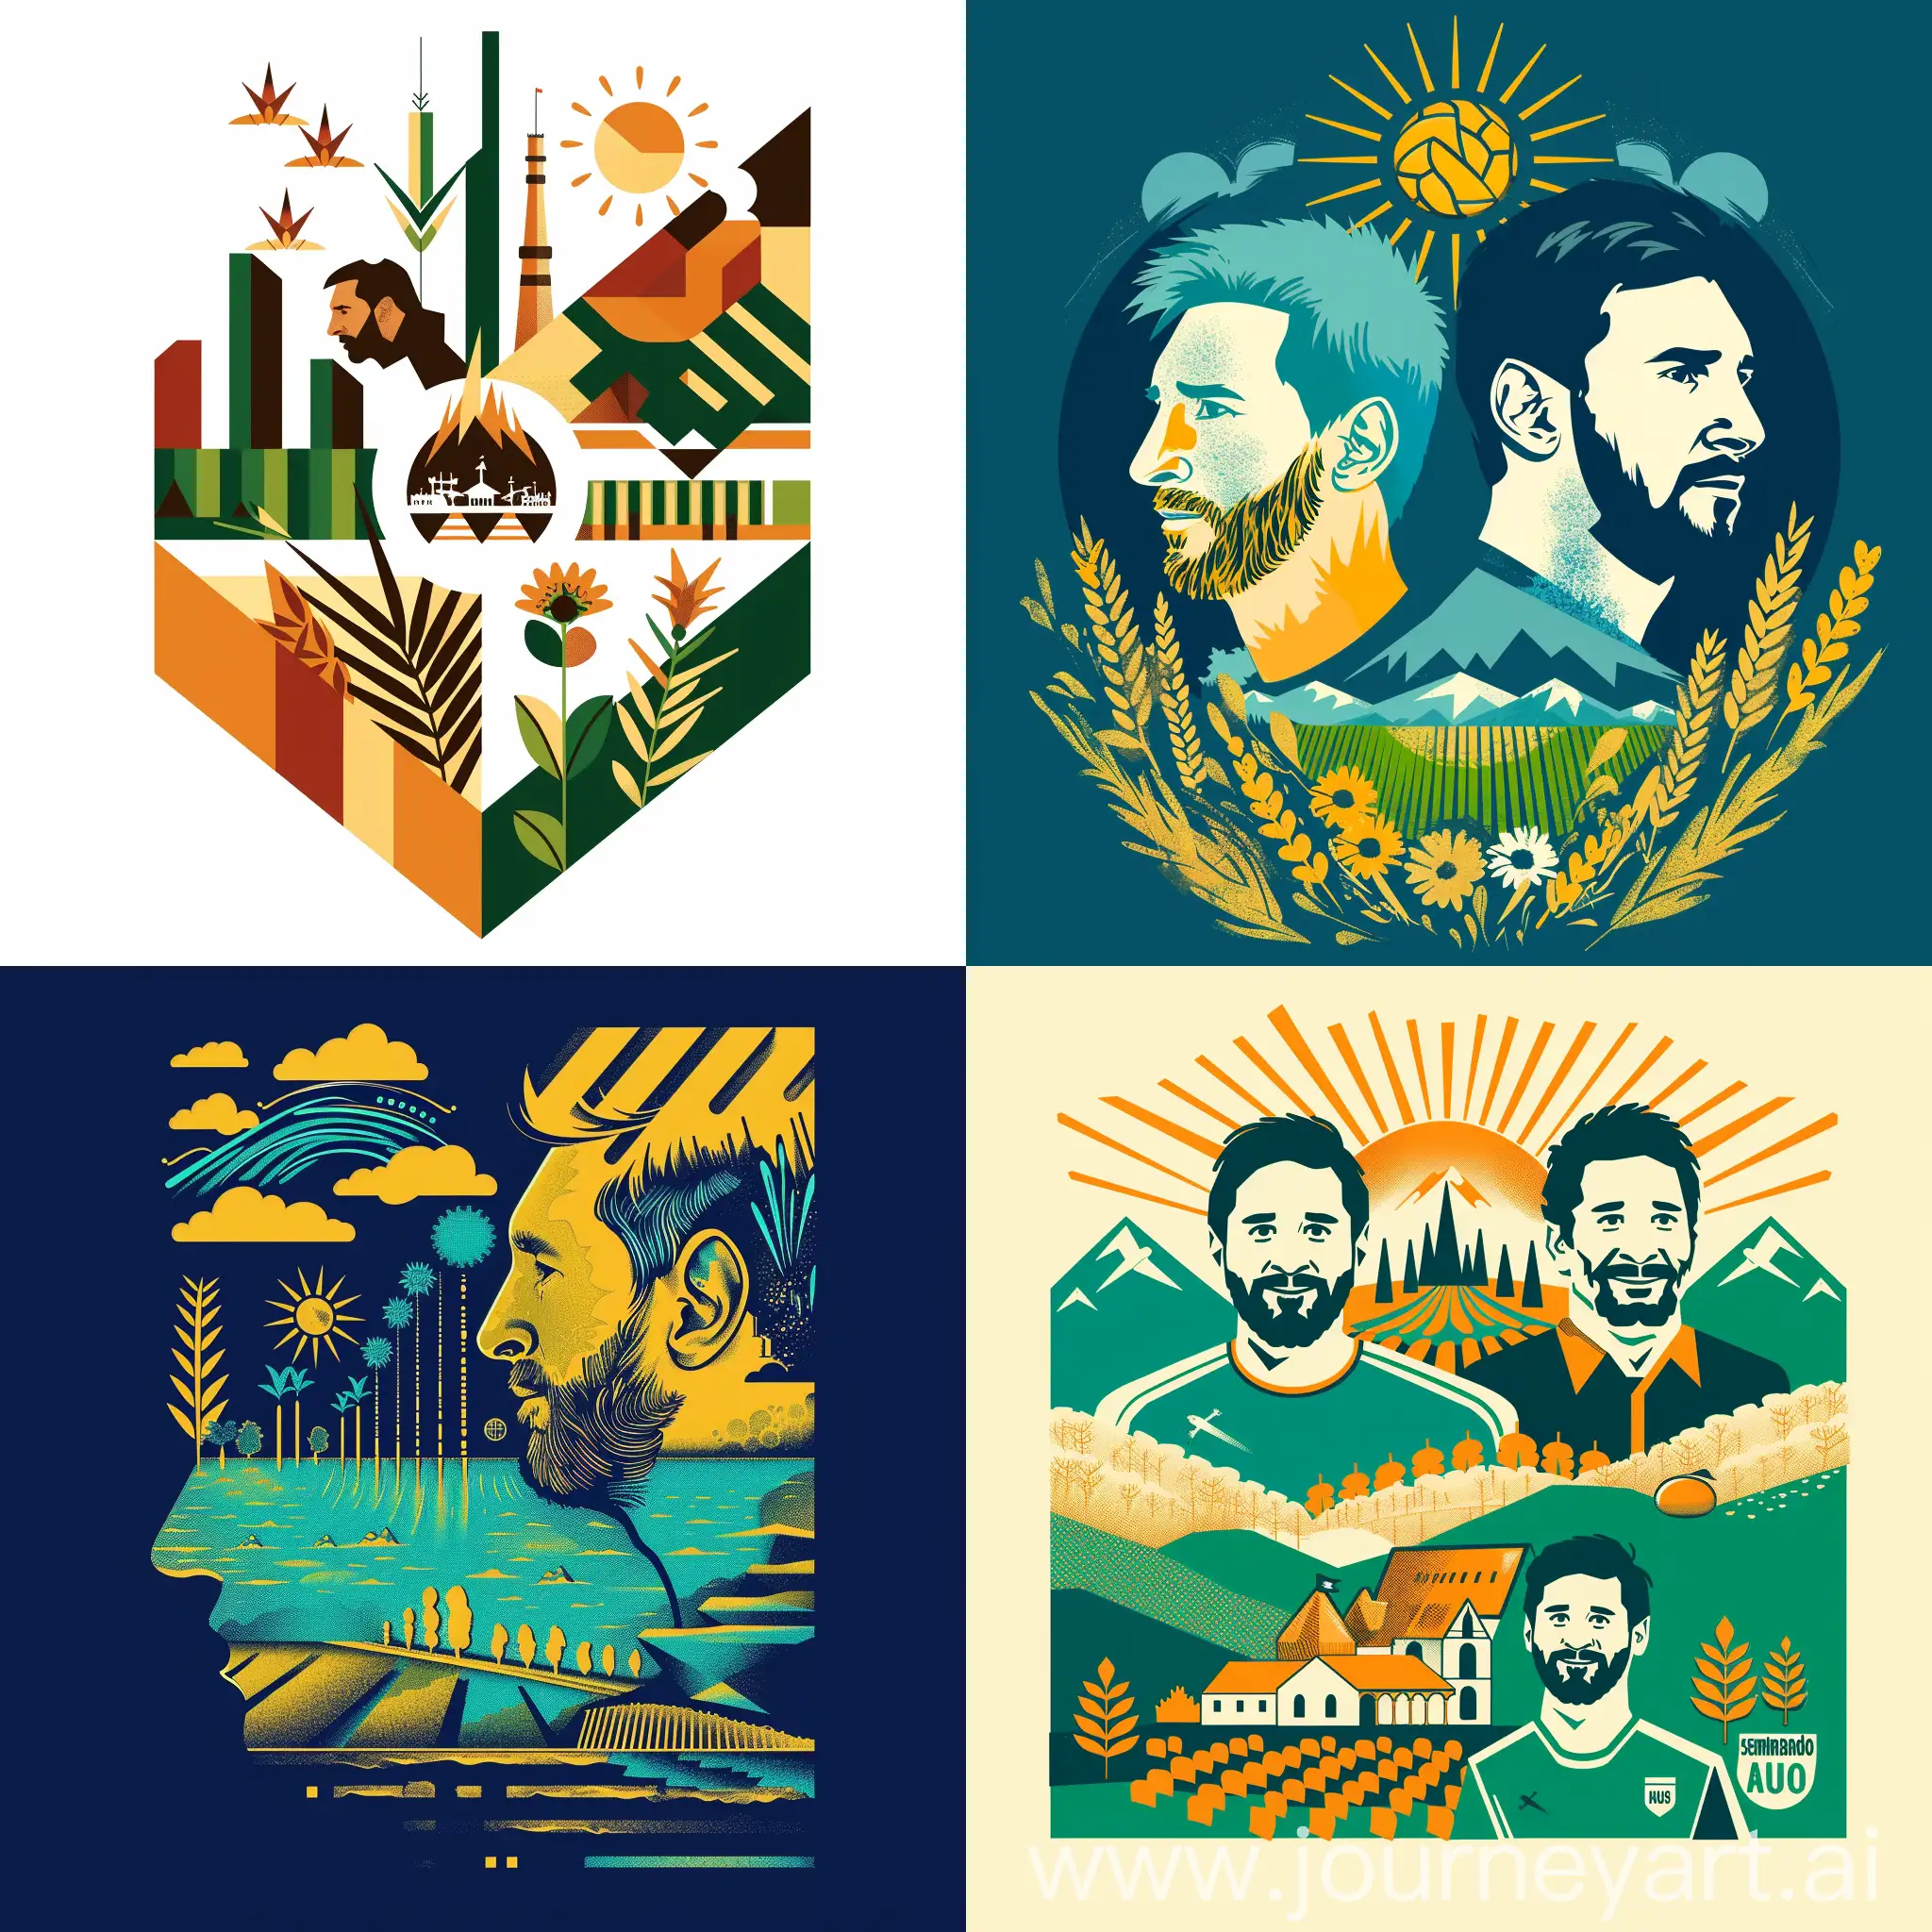 Create a logo design for the congress with the motto "sembrando nuestro futuro" This design incorporates elements that represent agriculture and the Argentine countryside, symbolizing decision-making and looking toward the future. In addition, it includes a tribute to Lionel Messi and Diego Maradona, highlighting their impact as world champions in football.